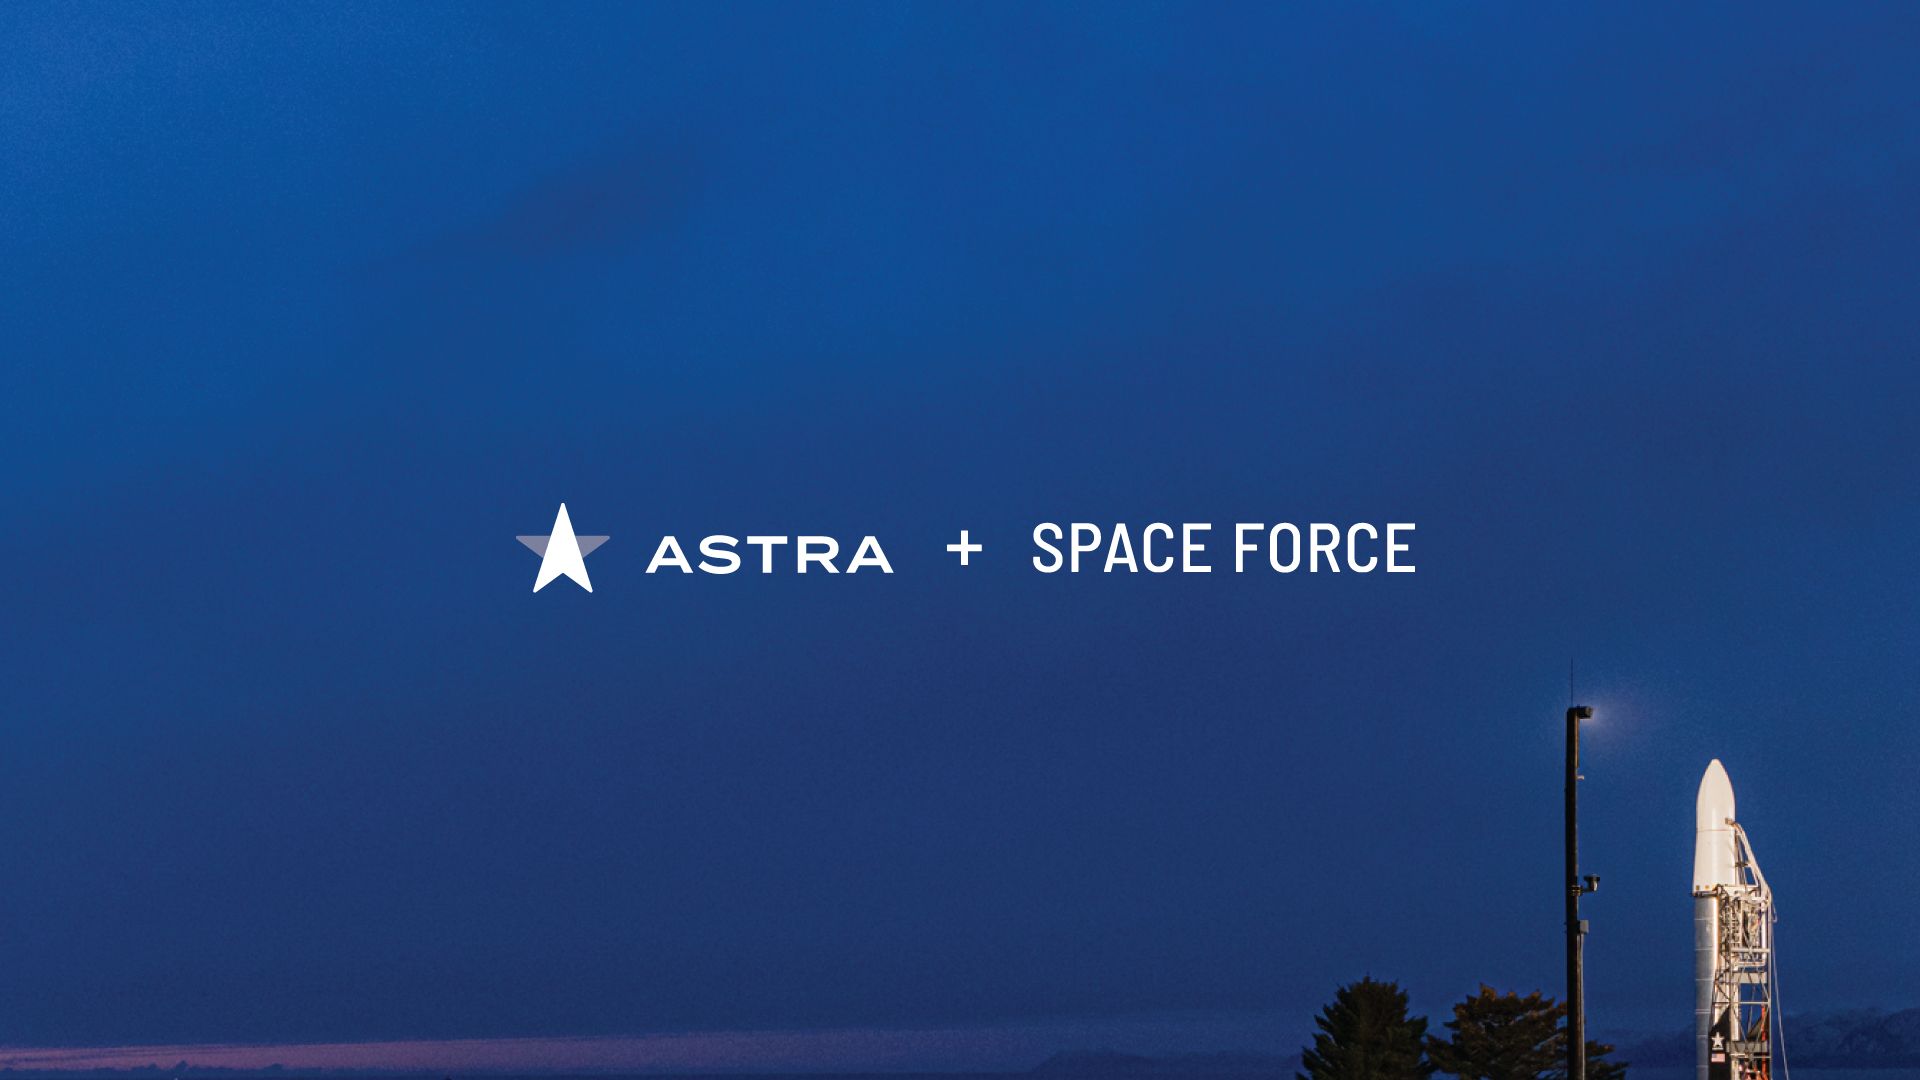 Astra Space chosen for award by US Space Force